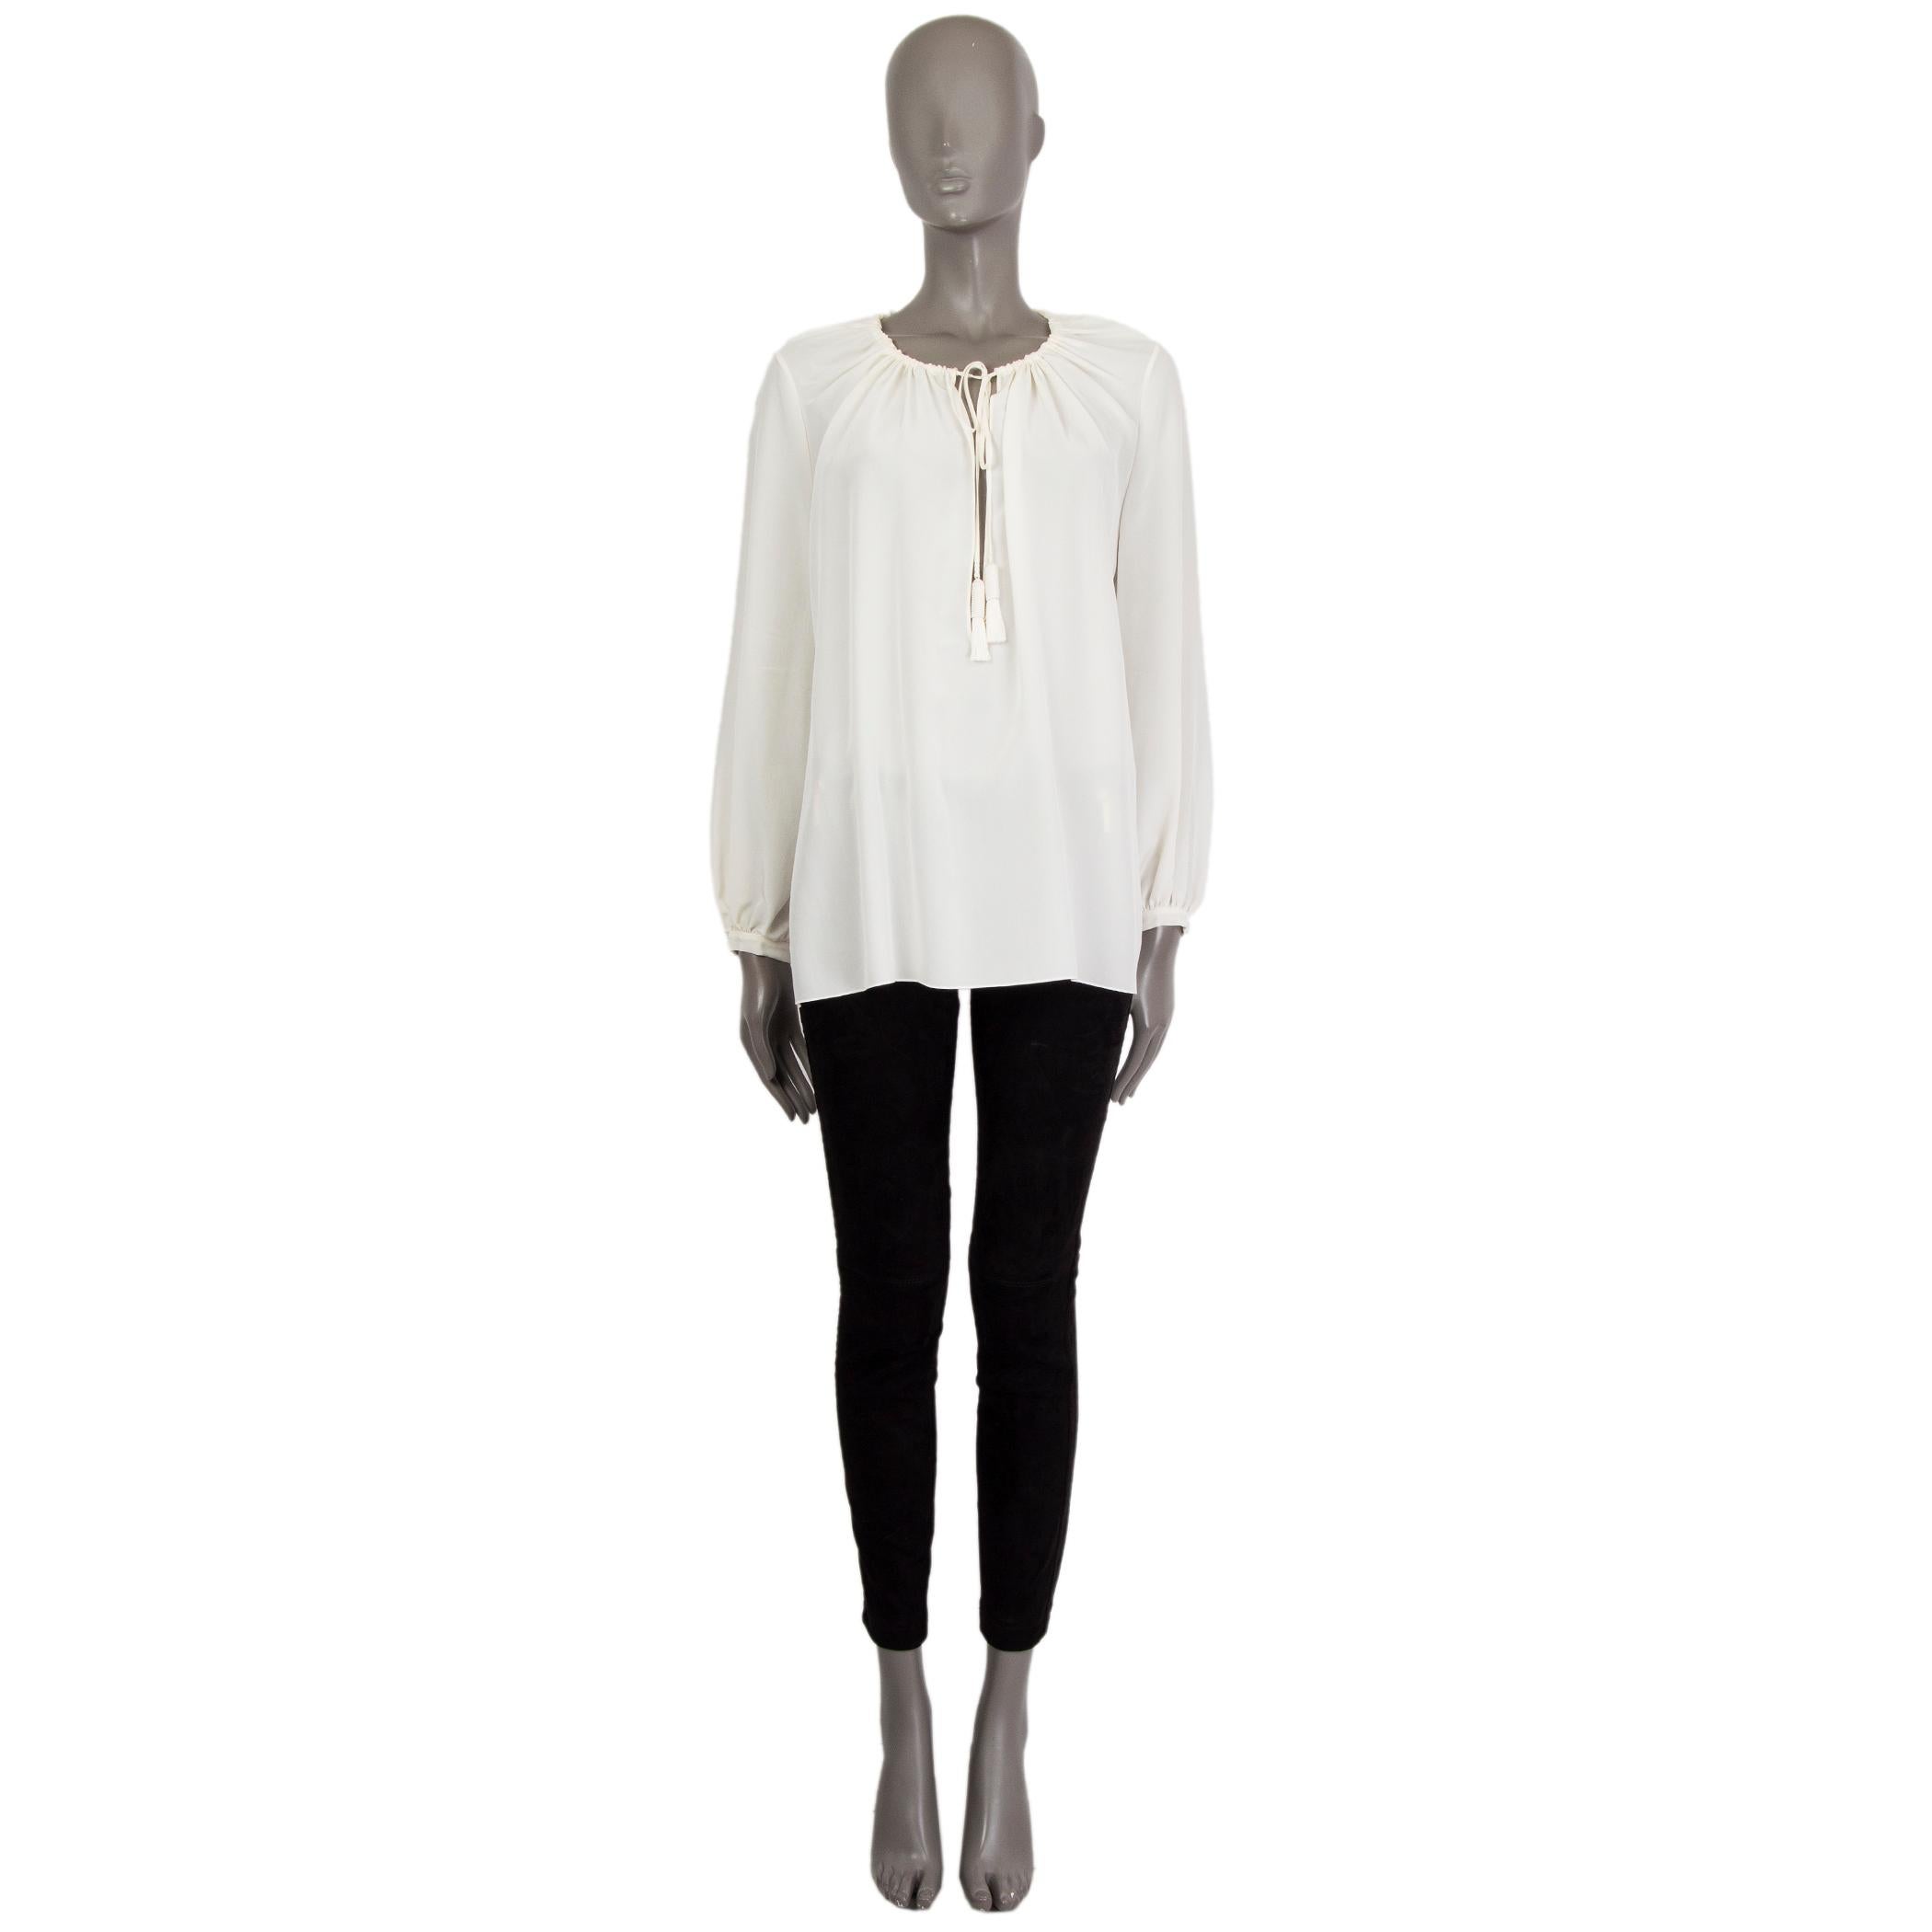 100% authentic Saint Laurent peasant blouse in off-white silk (100%) with a keyhole-neck. Closes on the front with string-tassels and buttons on the cuffs. Unlined. Has been worn and is in excellent condition. 

Measurements
Tag